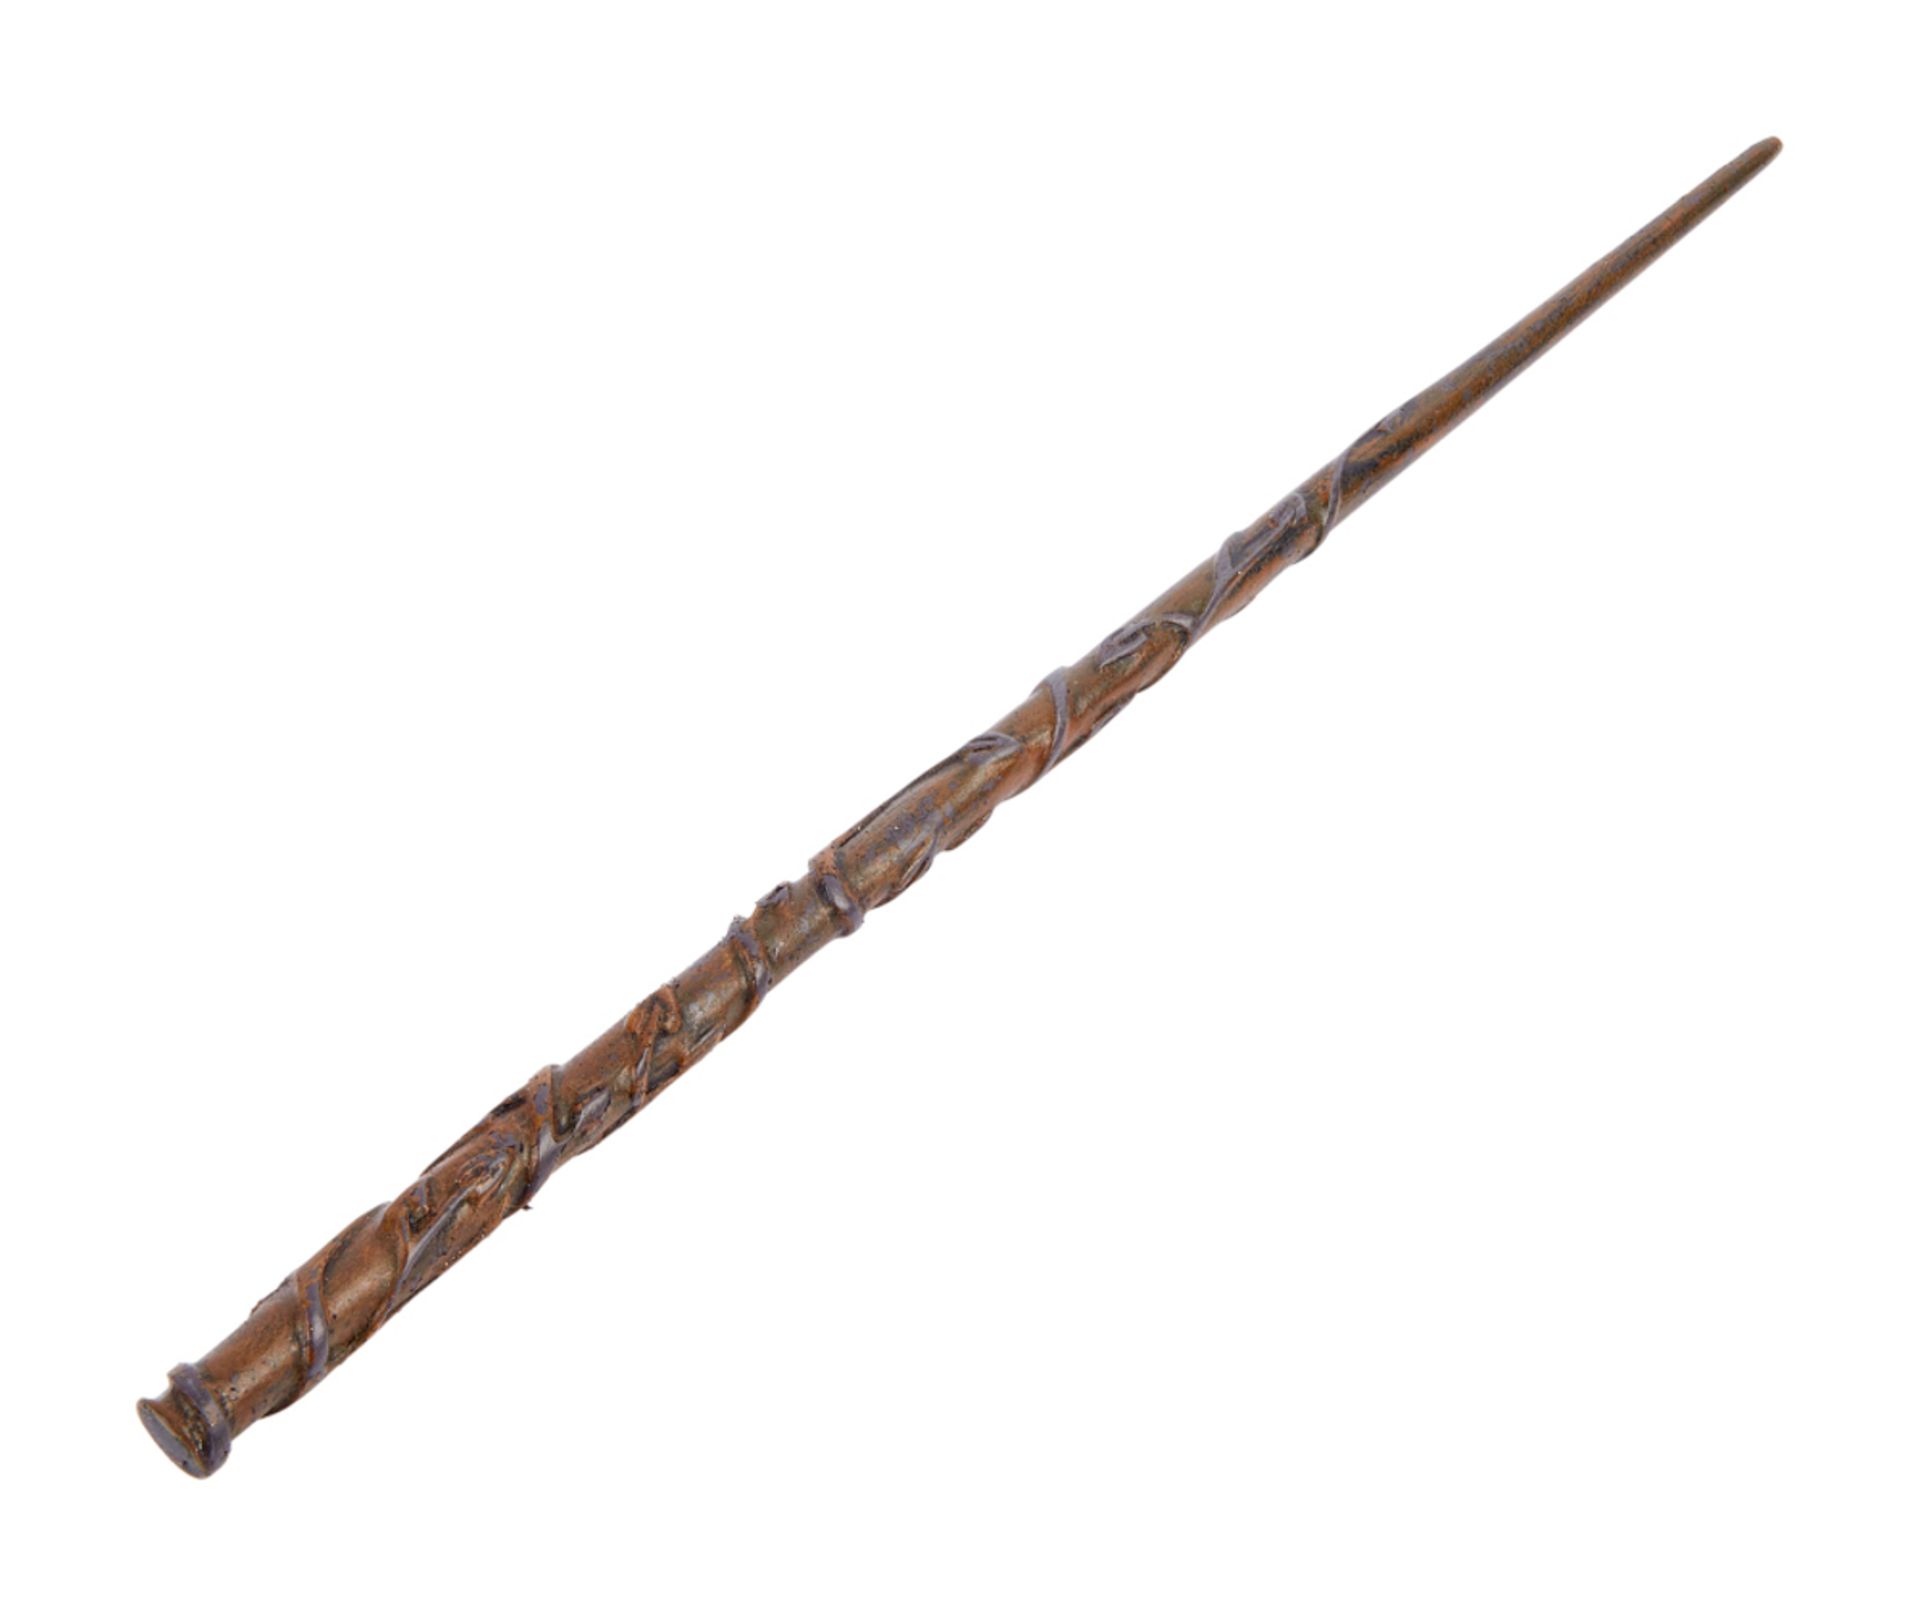 HARRY POTTER AND THE DEATHLY HALLOWS - PART 1 | EMMA WATSON "HERMIONE GRANGER" WAND PROP (WITH DVD) - Image 2 of 11